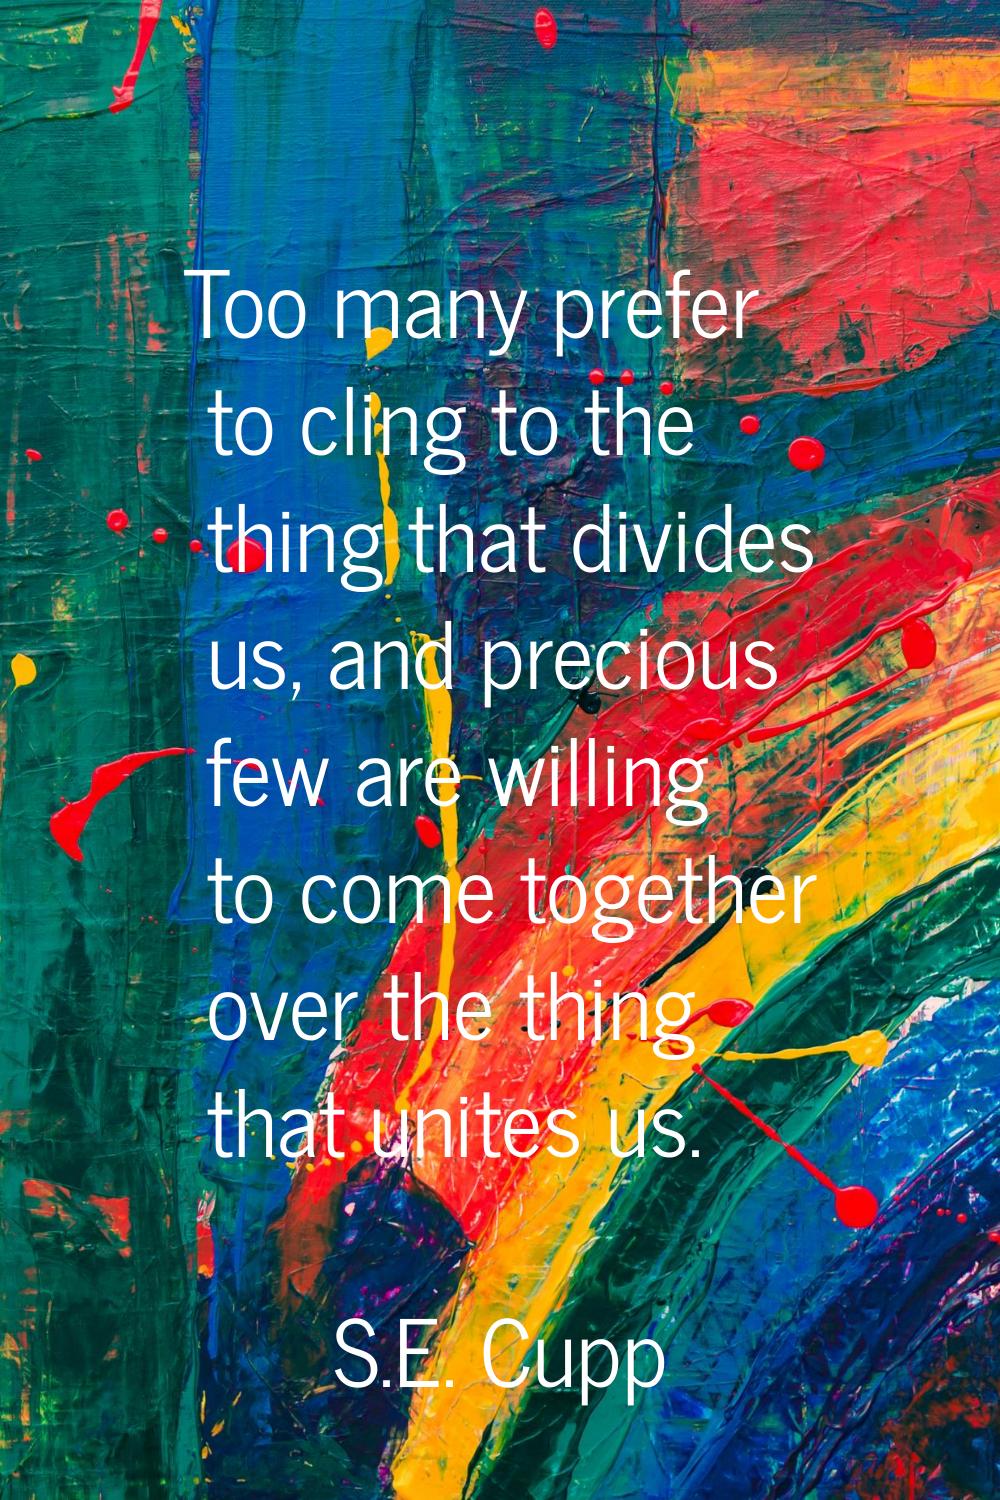 Too many prefer to cling to the thing that divides us, and precious few are willing to come togethe